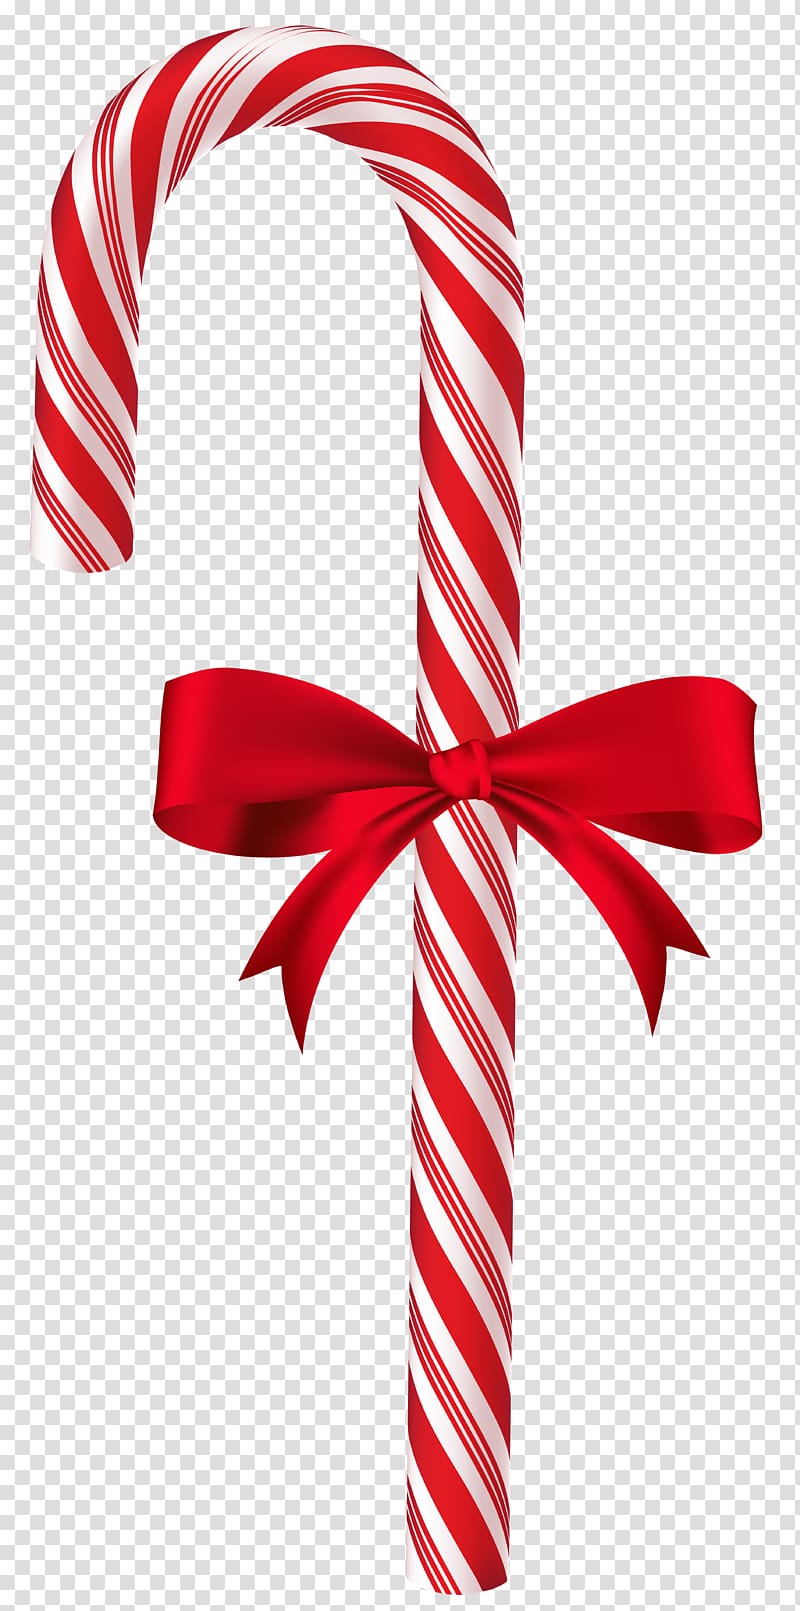 cane with ribbon poster, Candy cane Christmas , Candy Cane with Red Bow transparent background PNG clipart